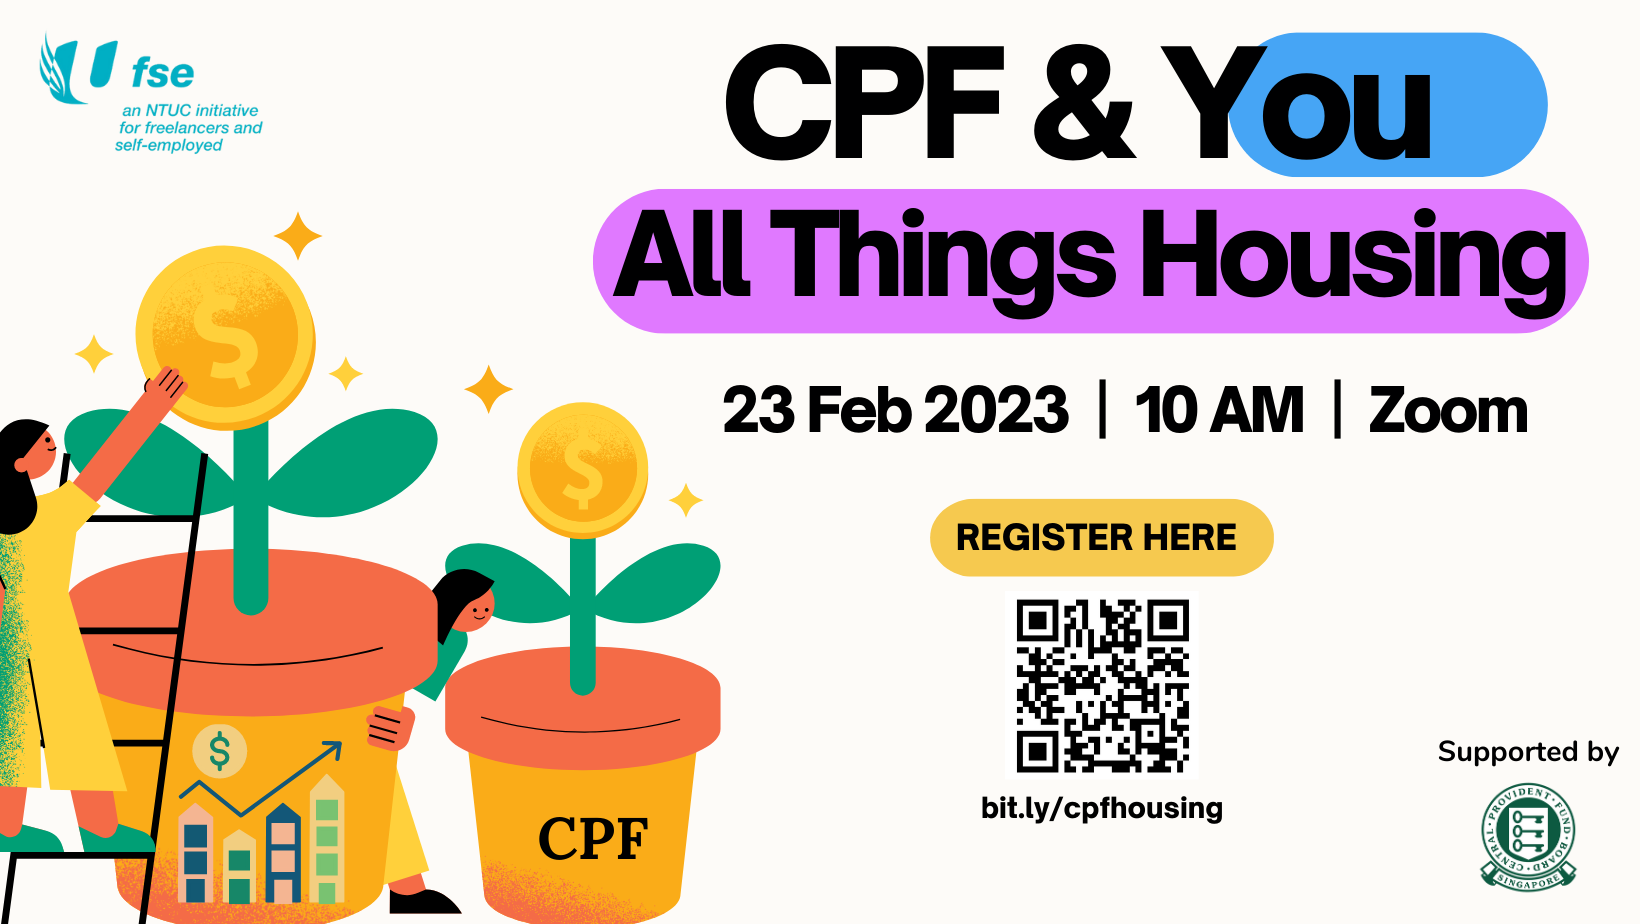 CPF & You- All Things Housing 23 Feb 2023 Web Banner.png